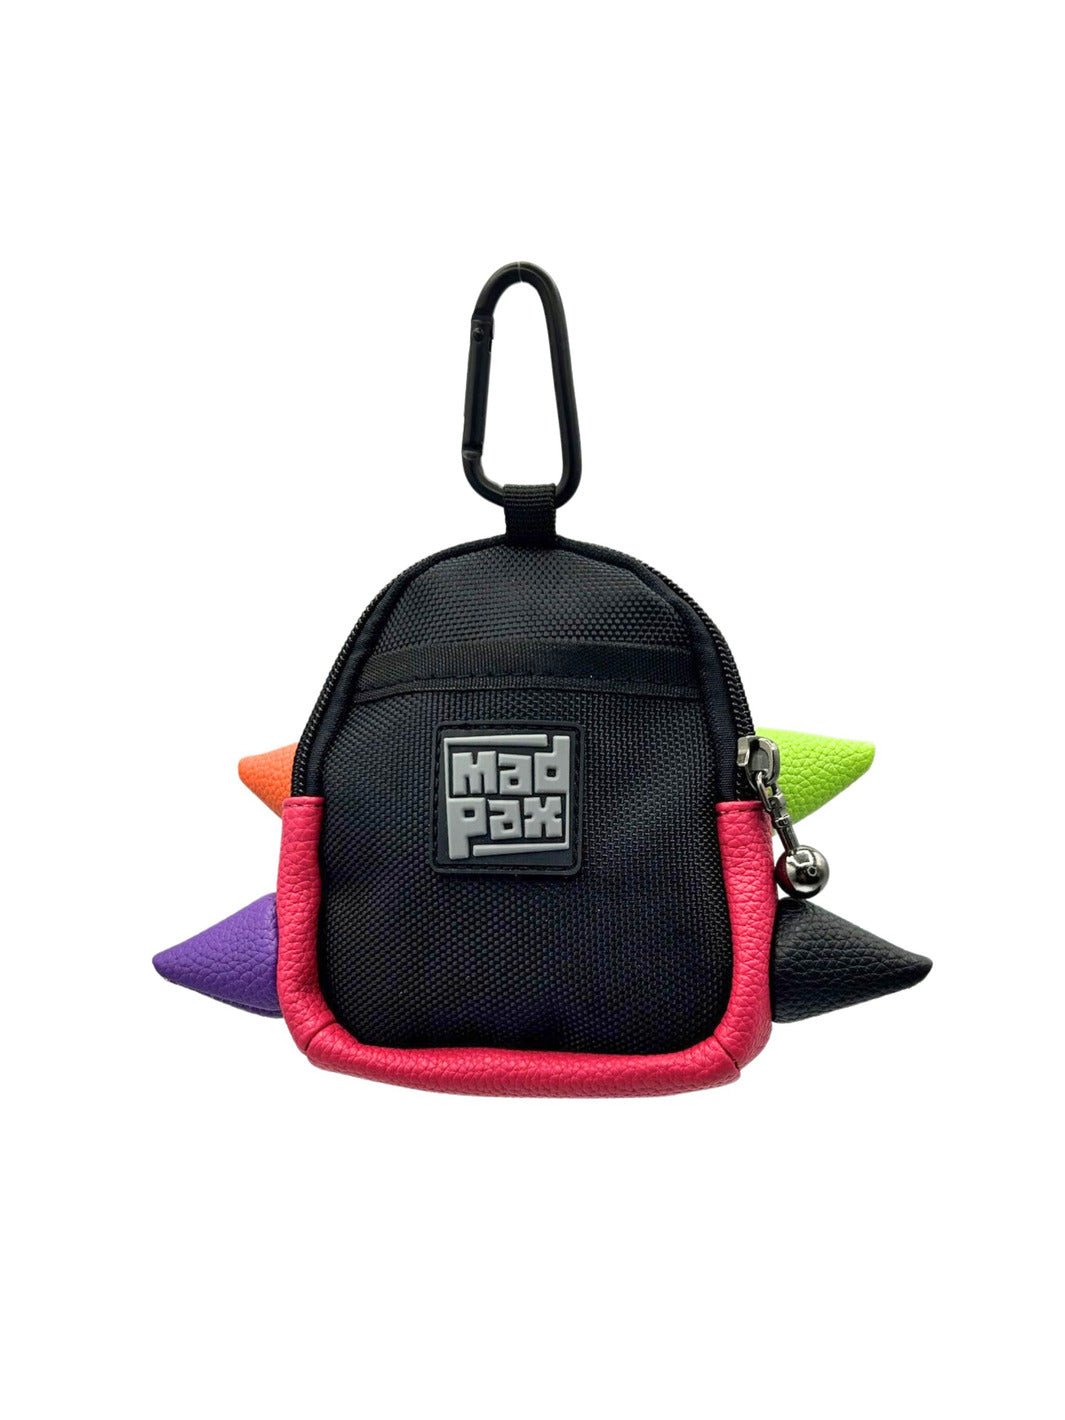 Streamers - Small clip-on pouch - Madpax